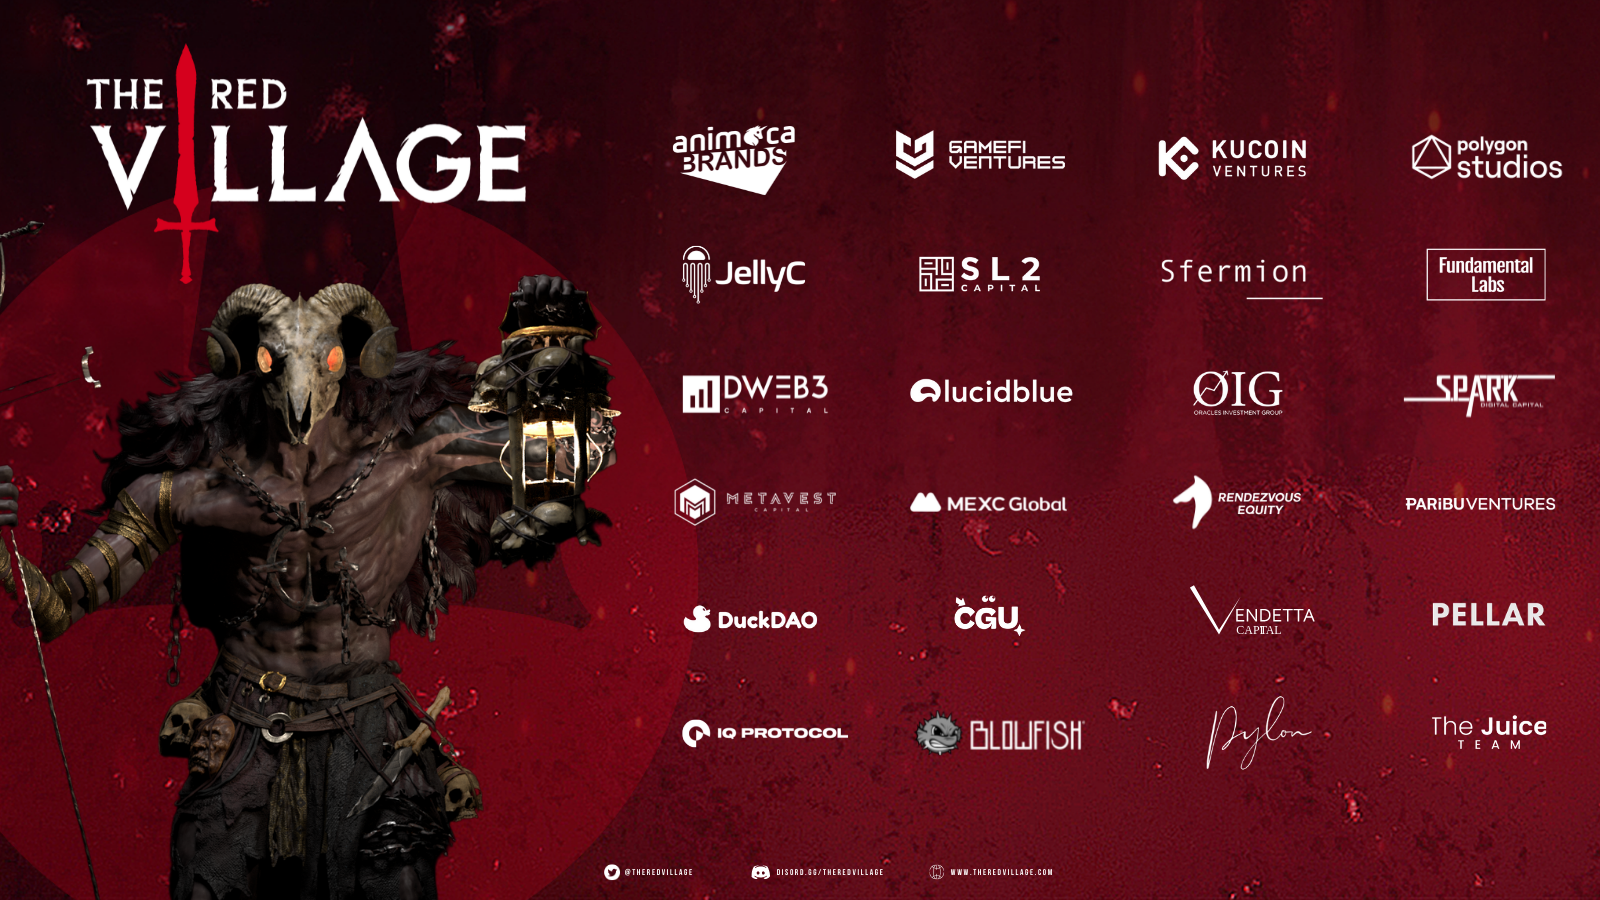 The Red Village announces $6.5M Seed Round led by Animoca Brands and GameFi Ventures Fund